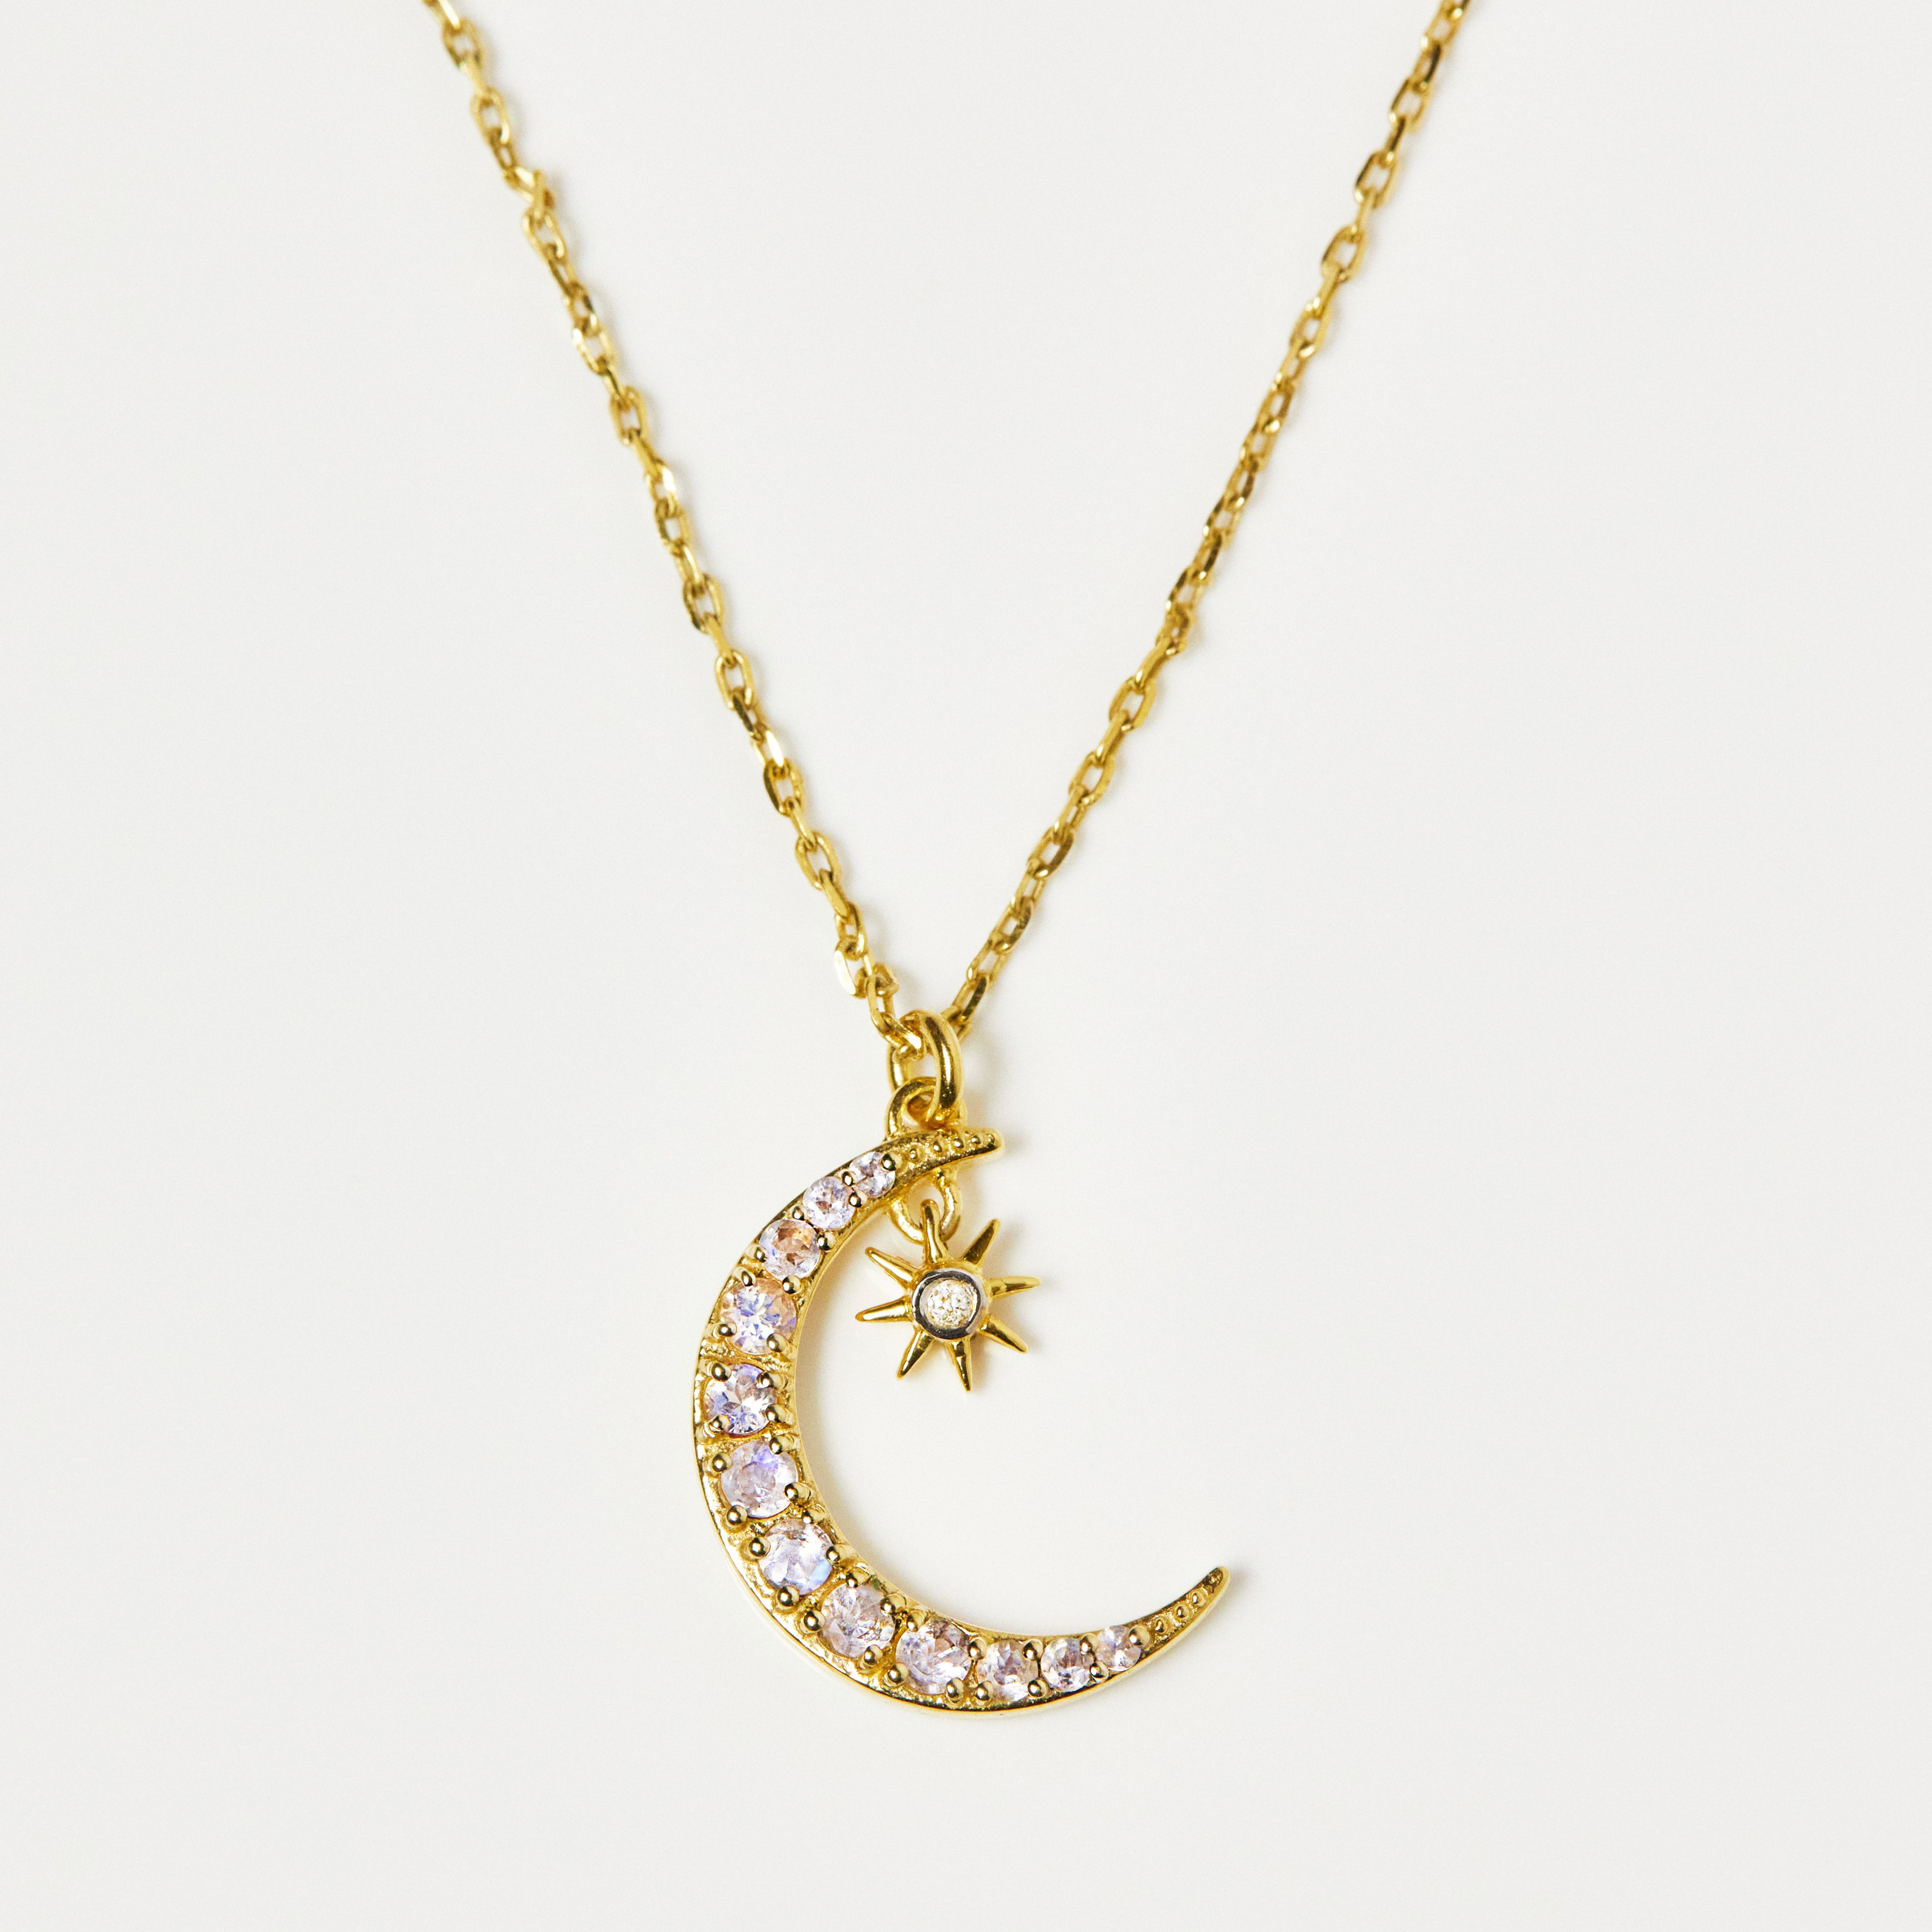 Doves by Doron Paloma 18K Yellow Gold Moon and Star Diamond Necklace 159887  - Trice Jewelers